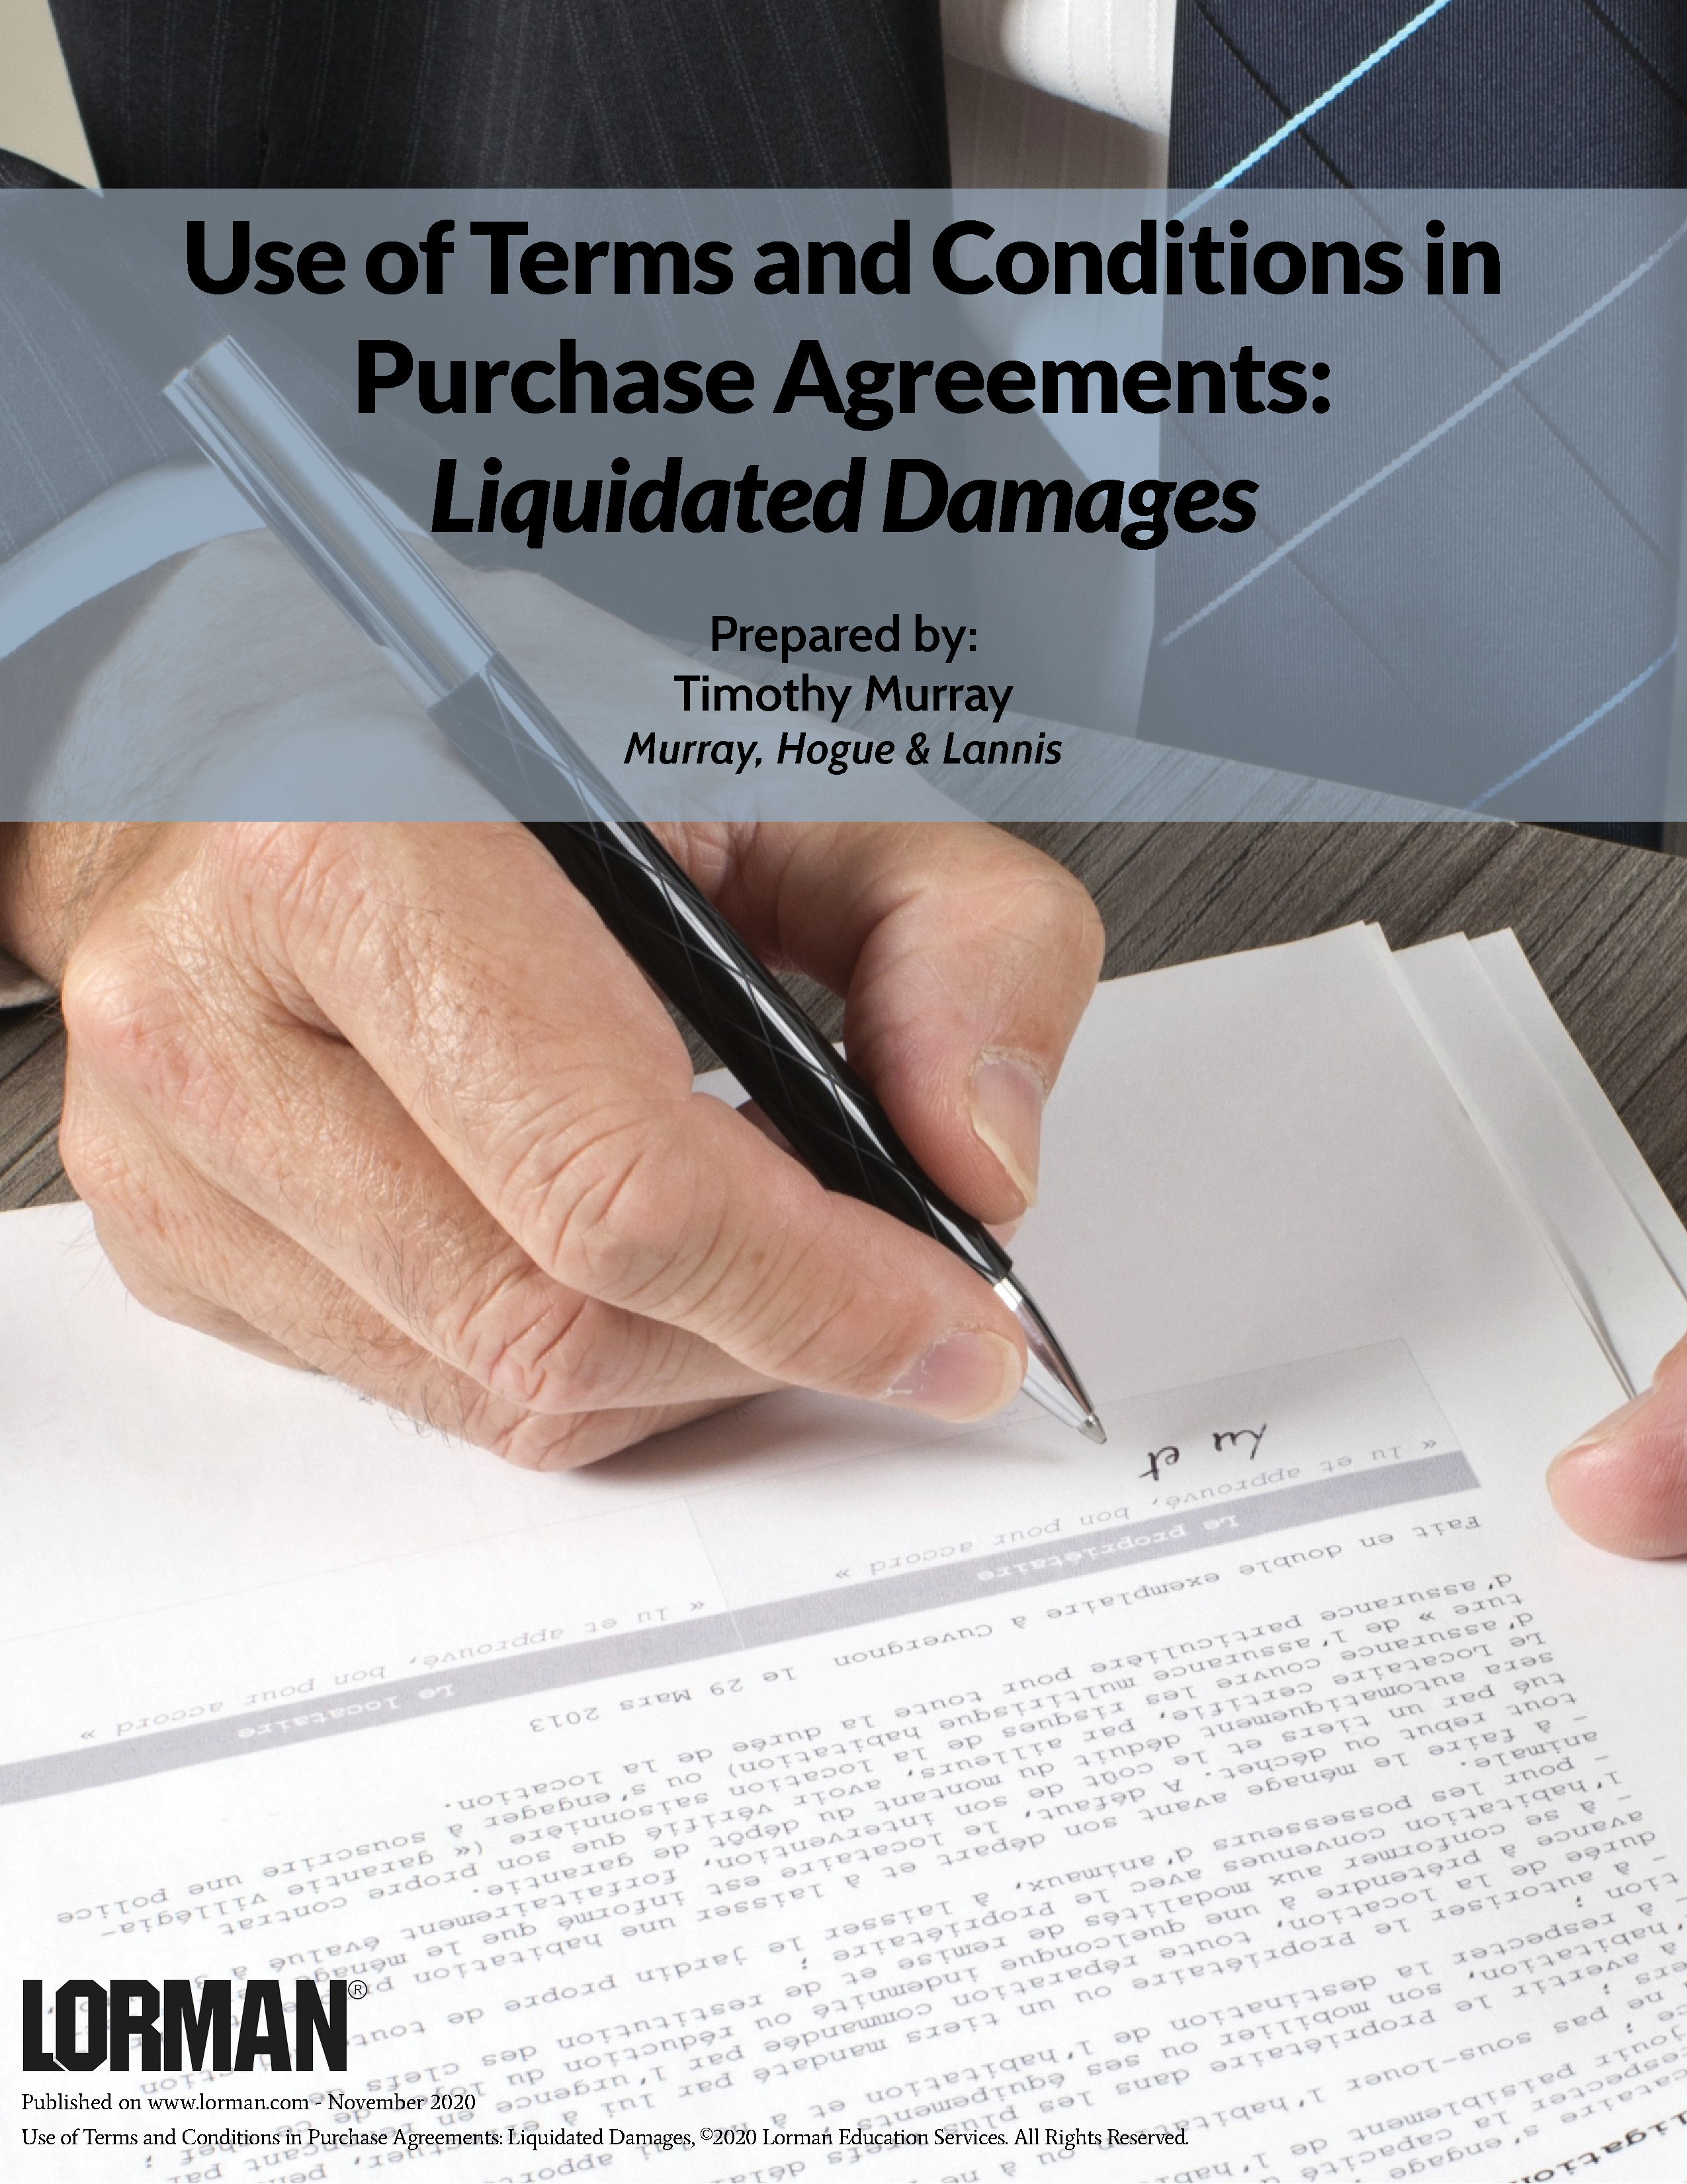 Use of Terms and Conditions in Purchase Agreements: Liquidated Damages